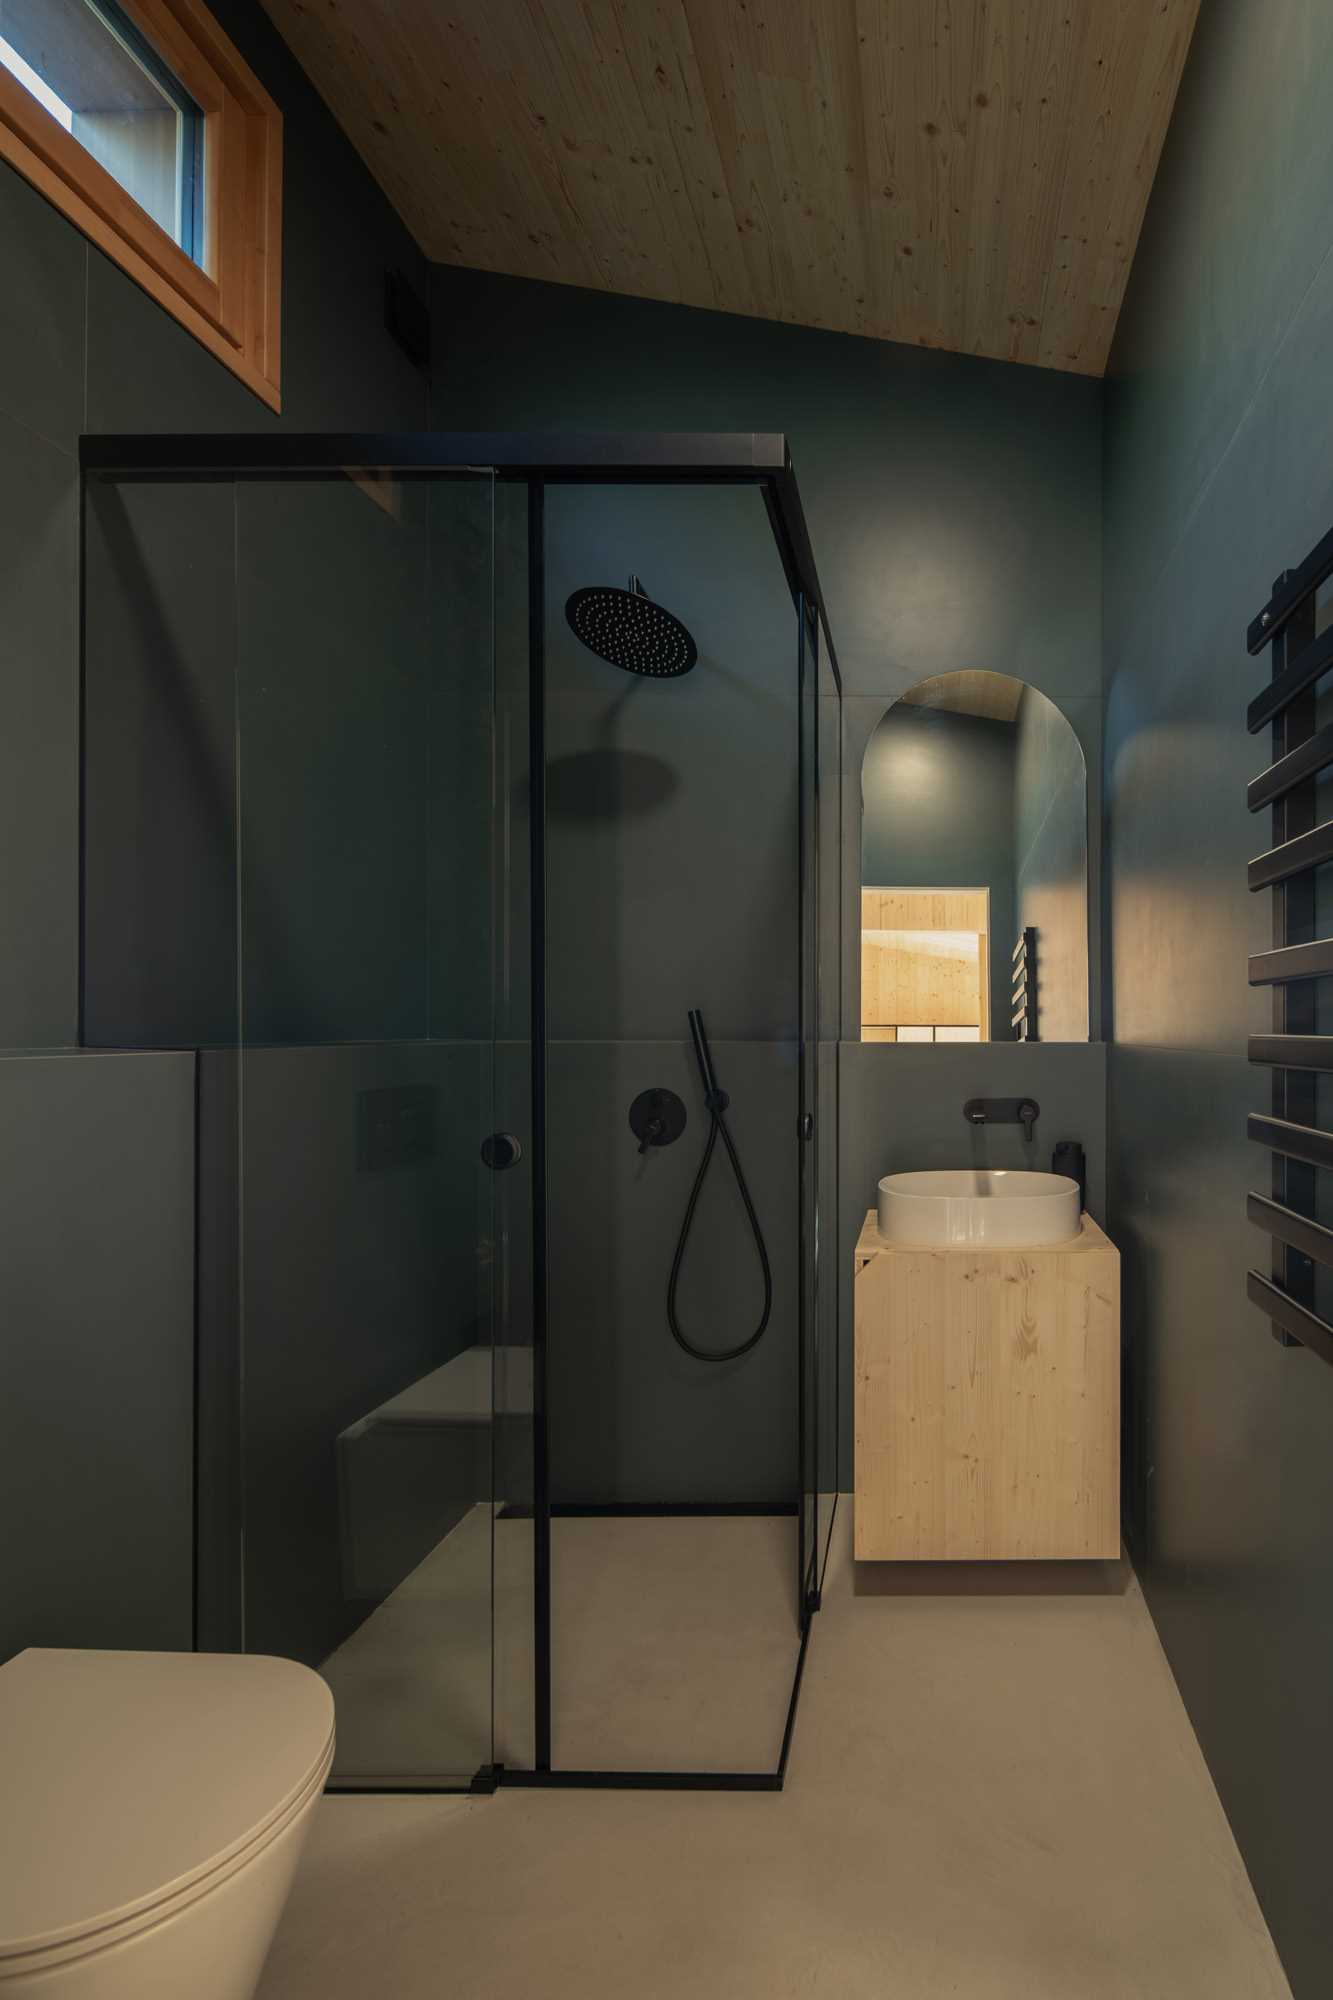 A modern bathroom with dark walls, black accents, and an angled wood ceiling.